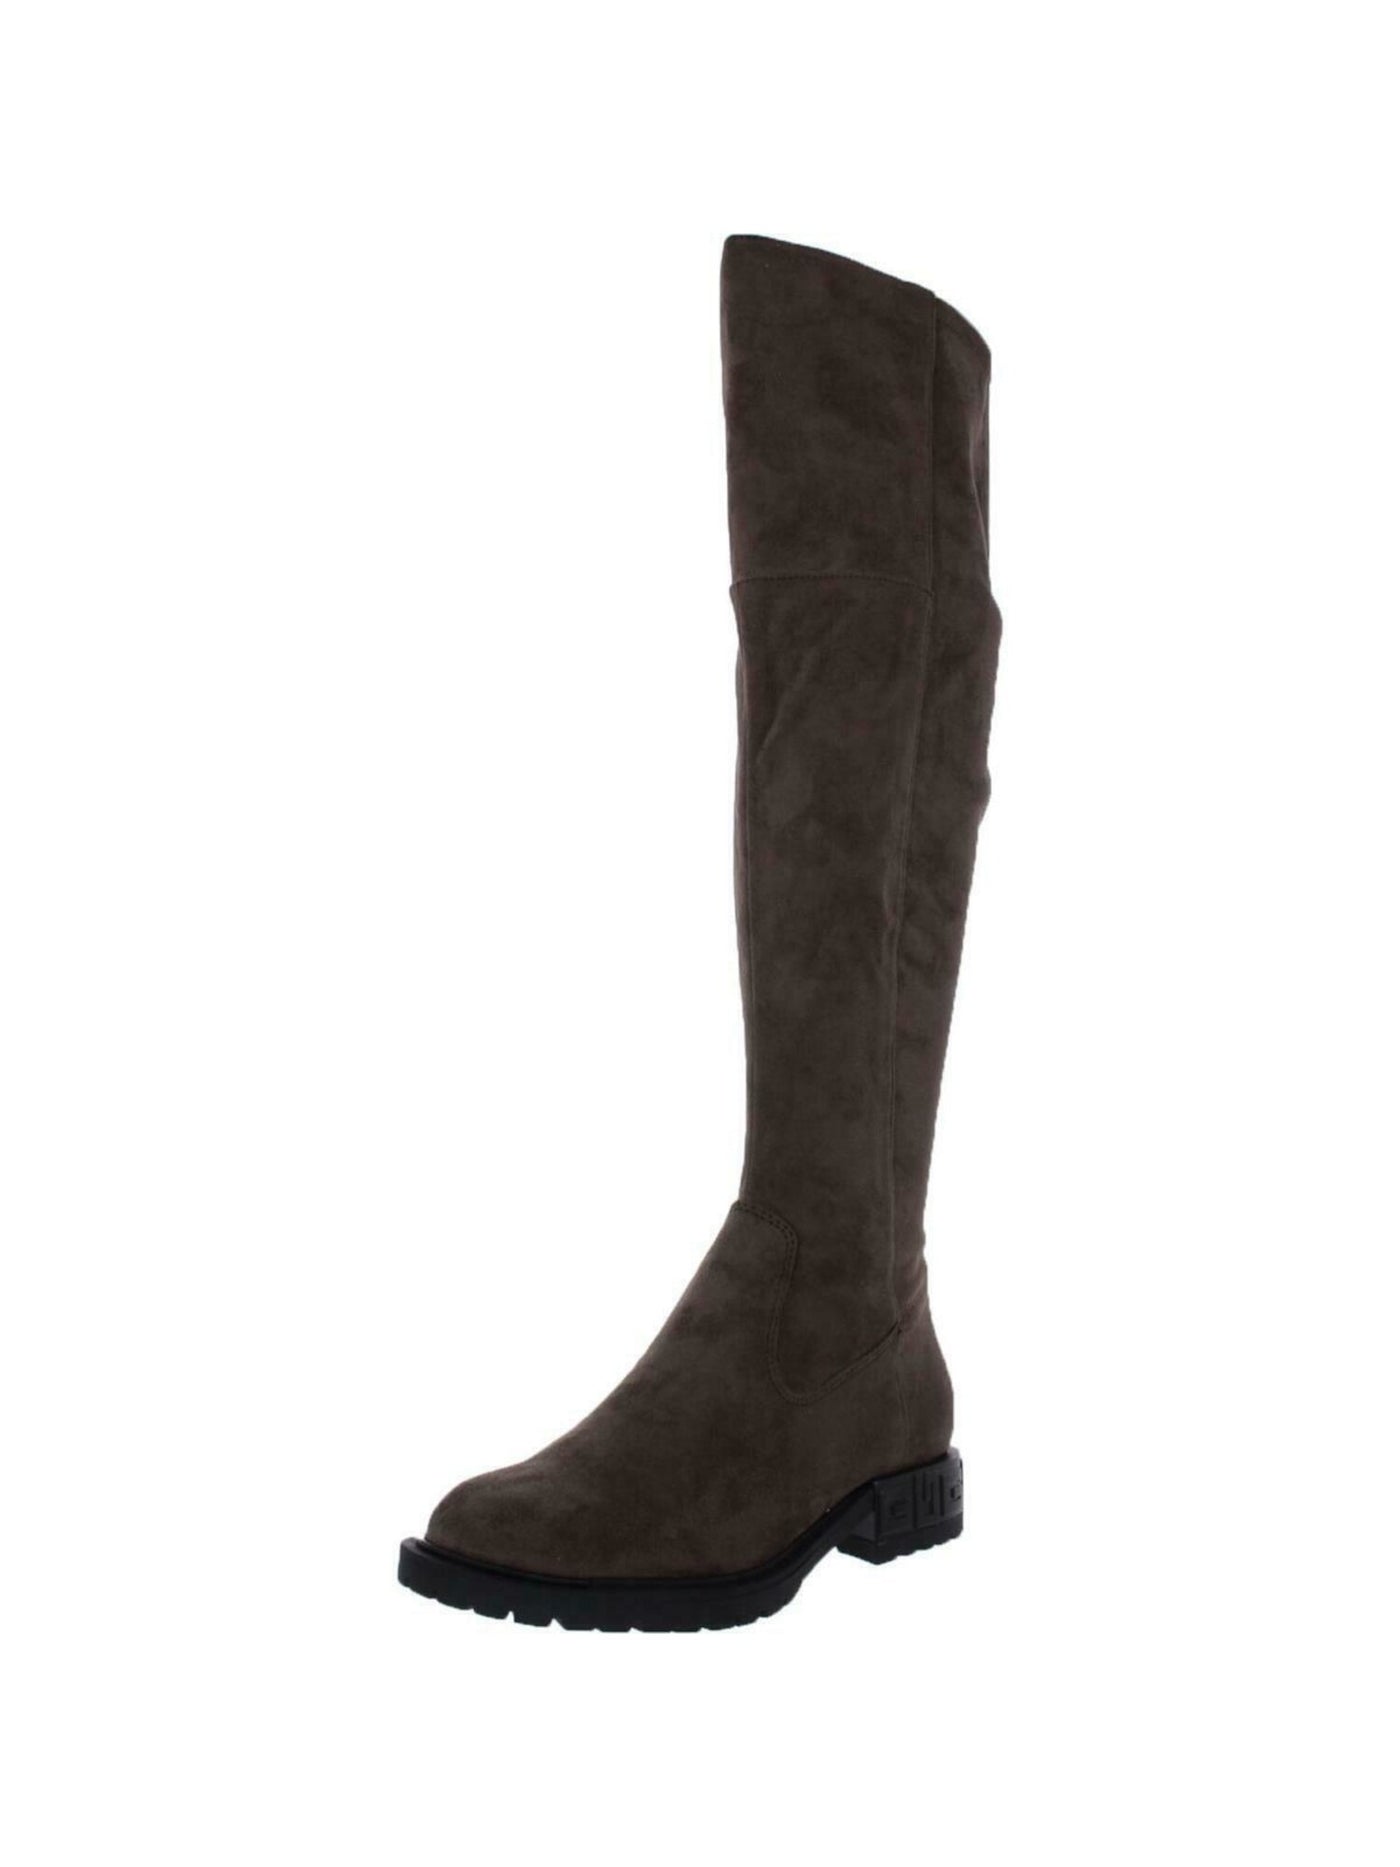 GUESS Womens Brown Cushioned Stretch Almond Toe Block Heel Zip-Up Boots Shoes 5